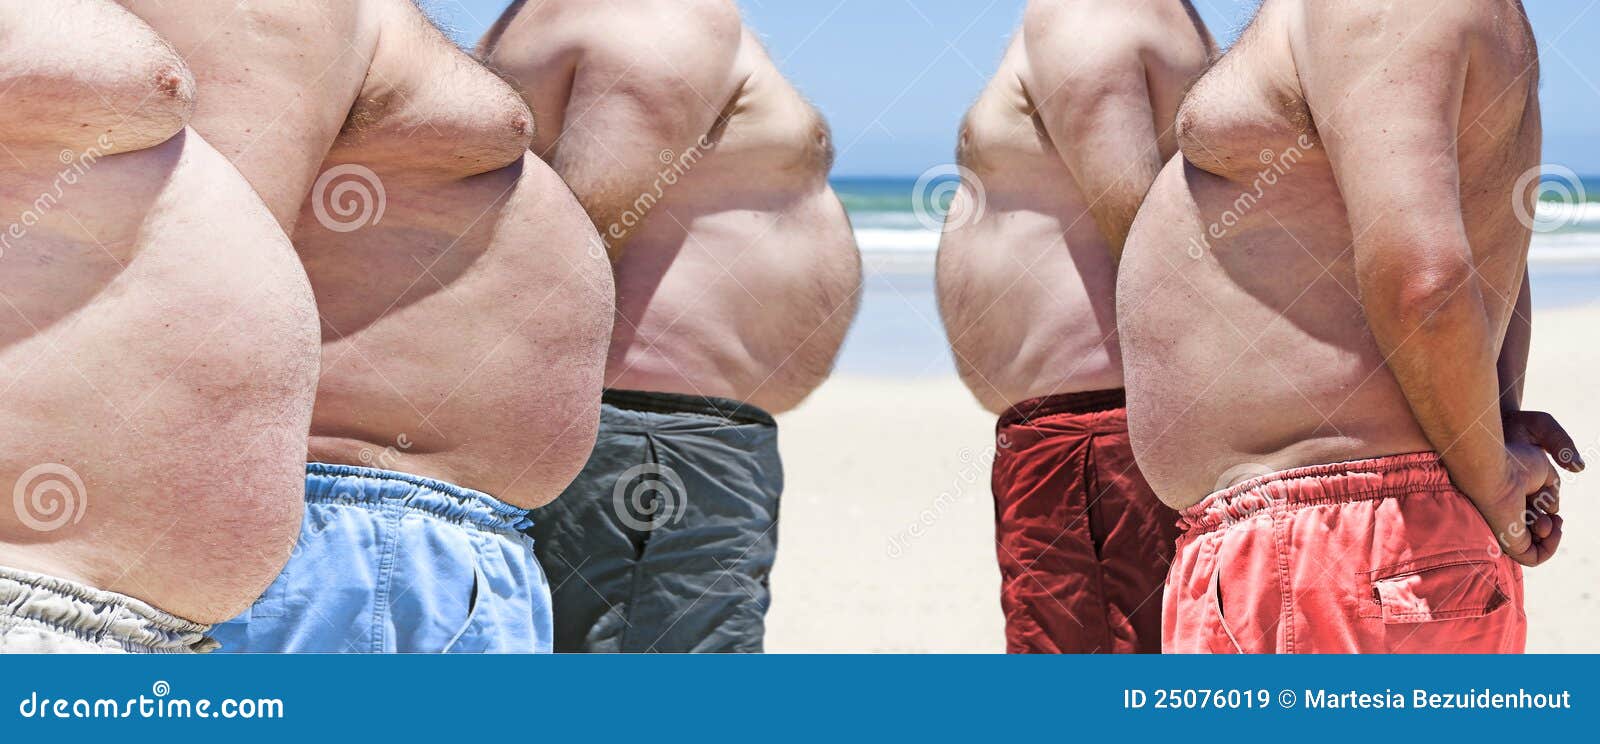 five very obese fat men on the beach